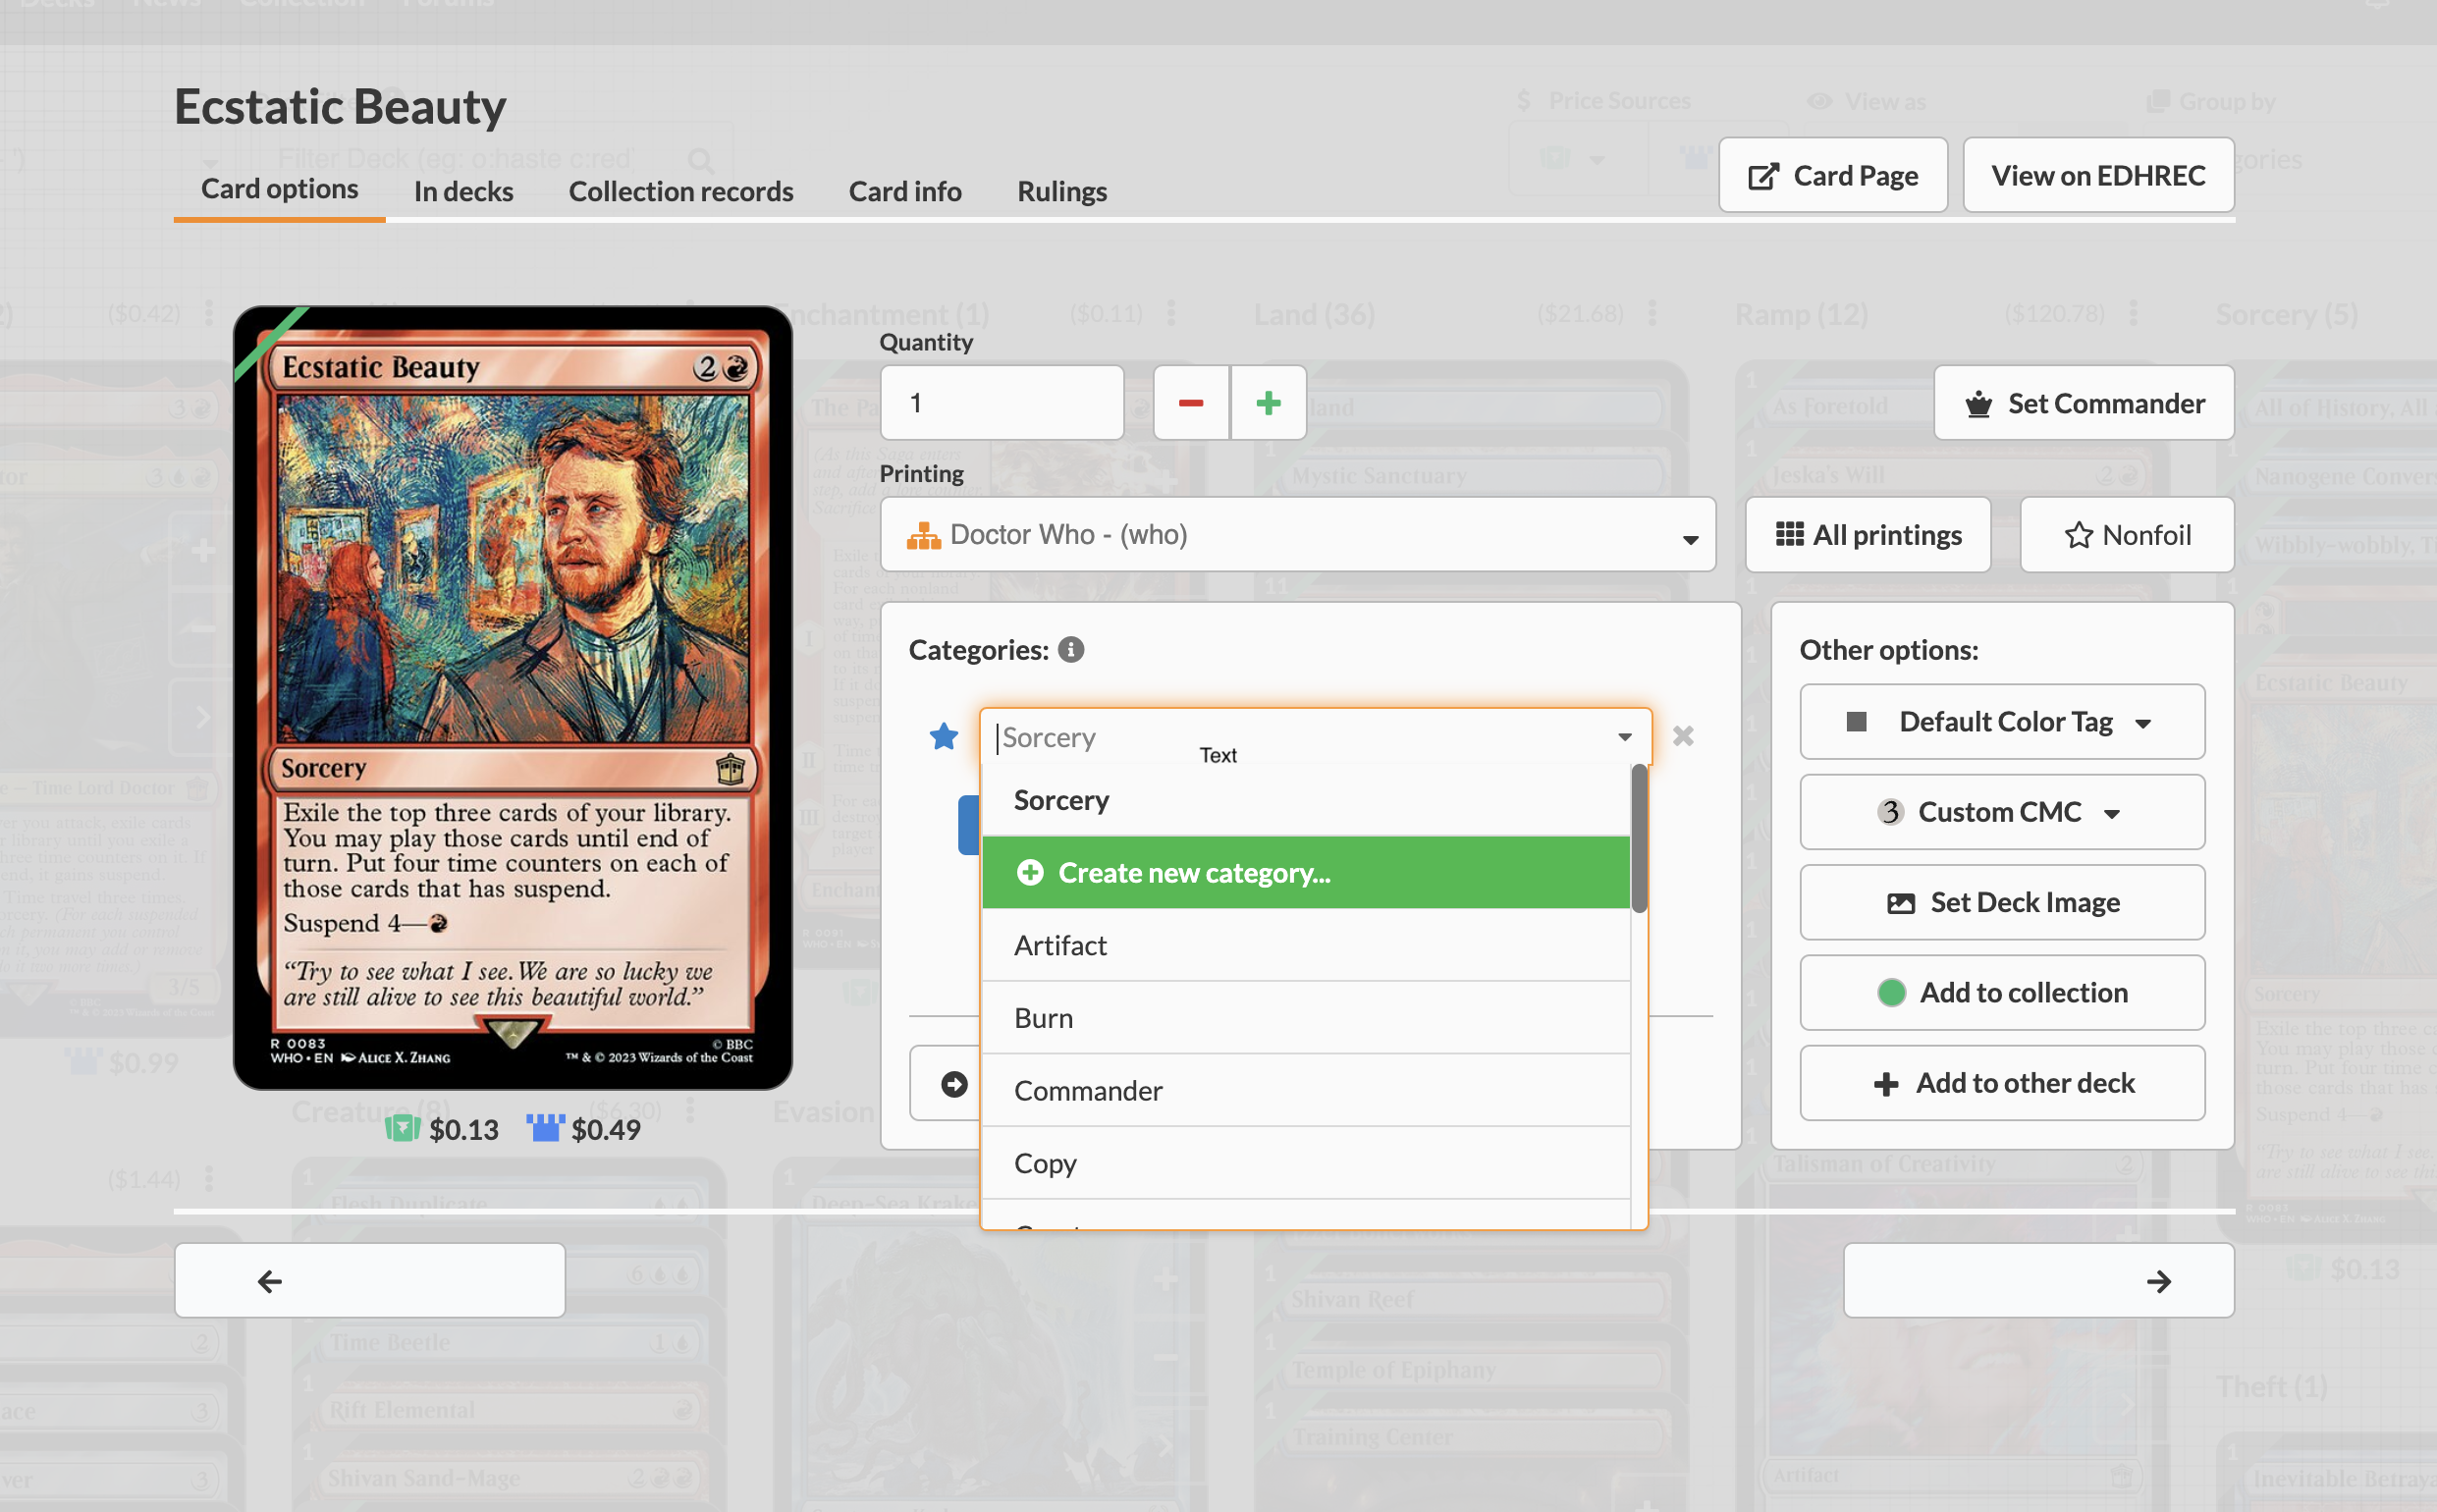 A screengrab of the Archidekt website showing the profile view of the Magic the Gathering card Ecstatic Beauty. A Select box labeled Categories is currently in the open state, showing a list of options like Artifact, Burn, Commander.